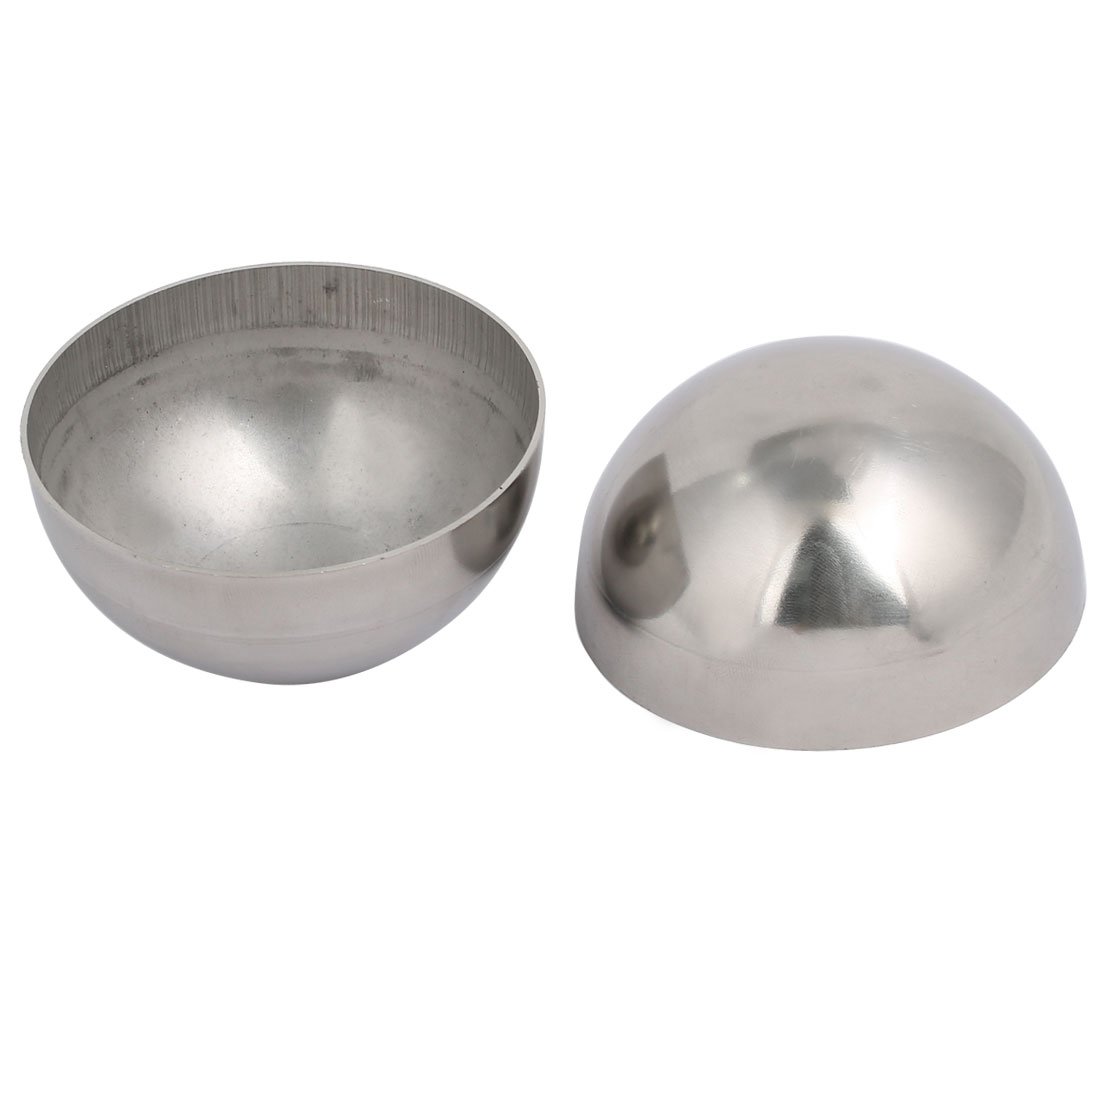 Stainless Steel Half Ball Manufacturers, Suppliers, Exporters in Mumbai India